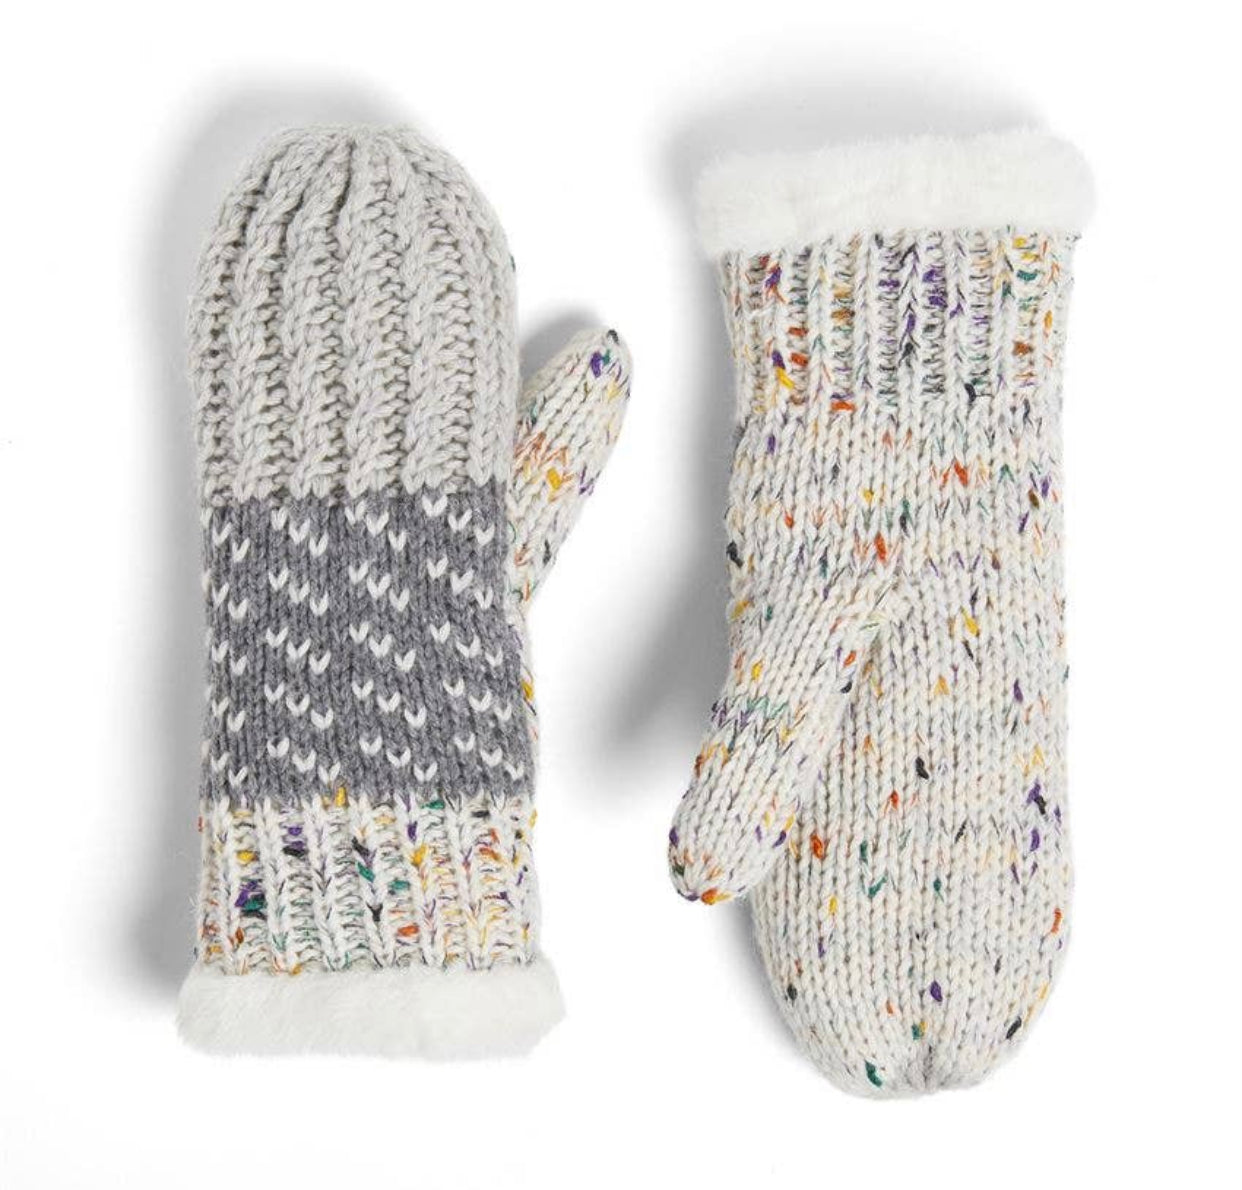 Lumi Mittens for Cold Days - Posh West Boutique